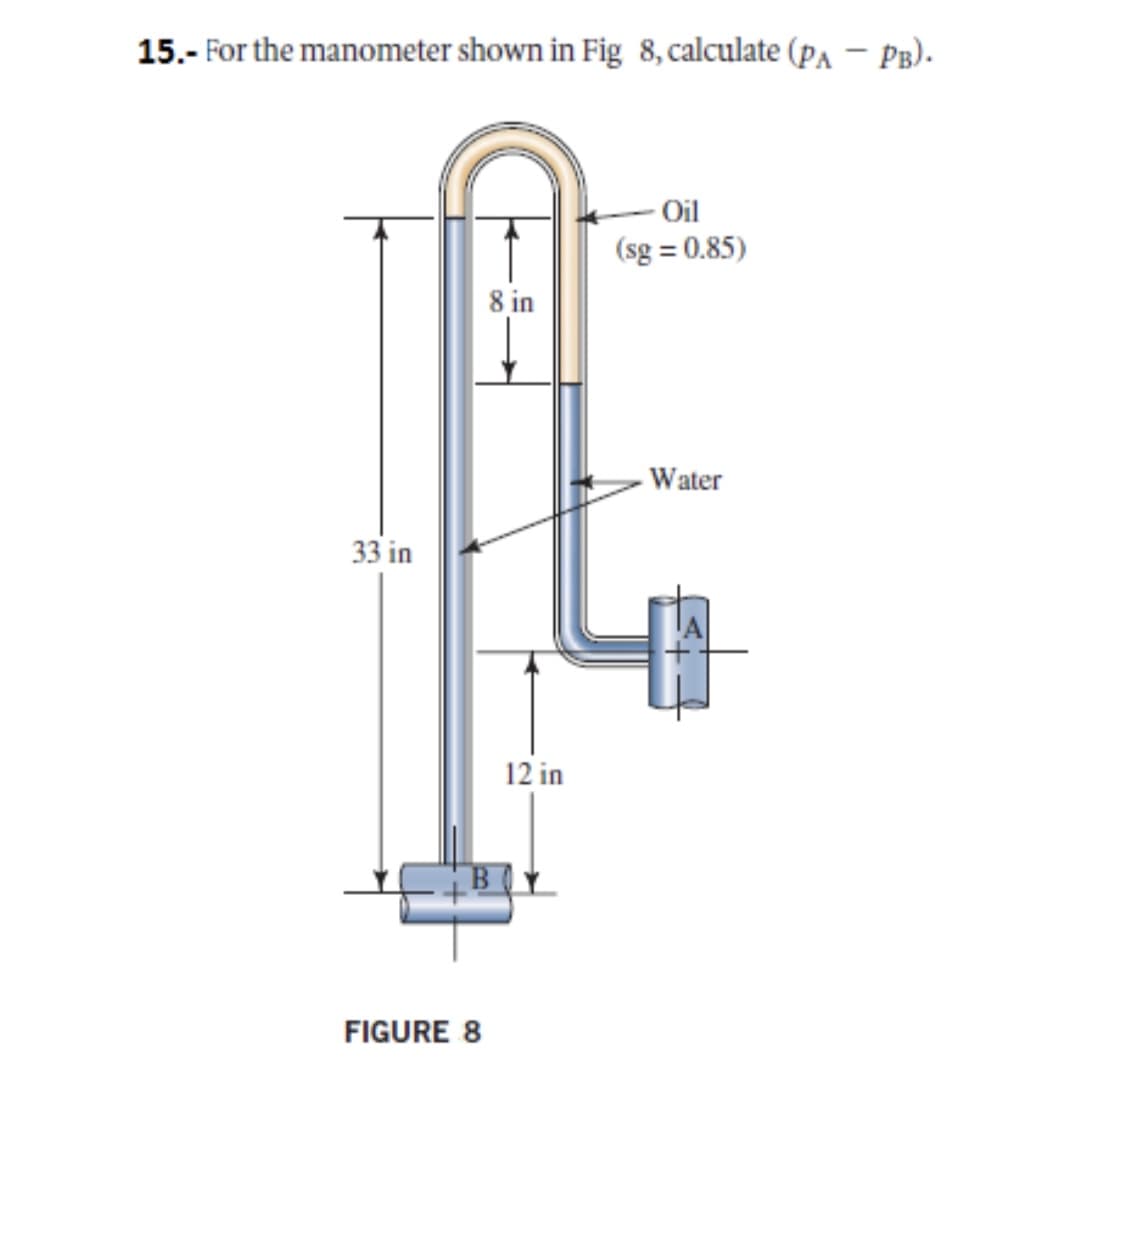 15.- For the manometer shown in Fig 8, calculate (pA – PB).
Oil
(sg = 0.85)
8 in
-Water
33 in
12 in
FIGURE 8
